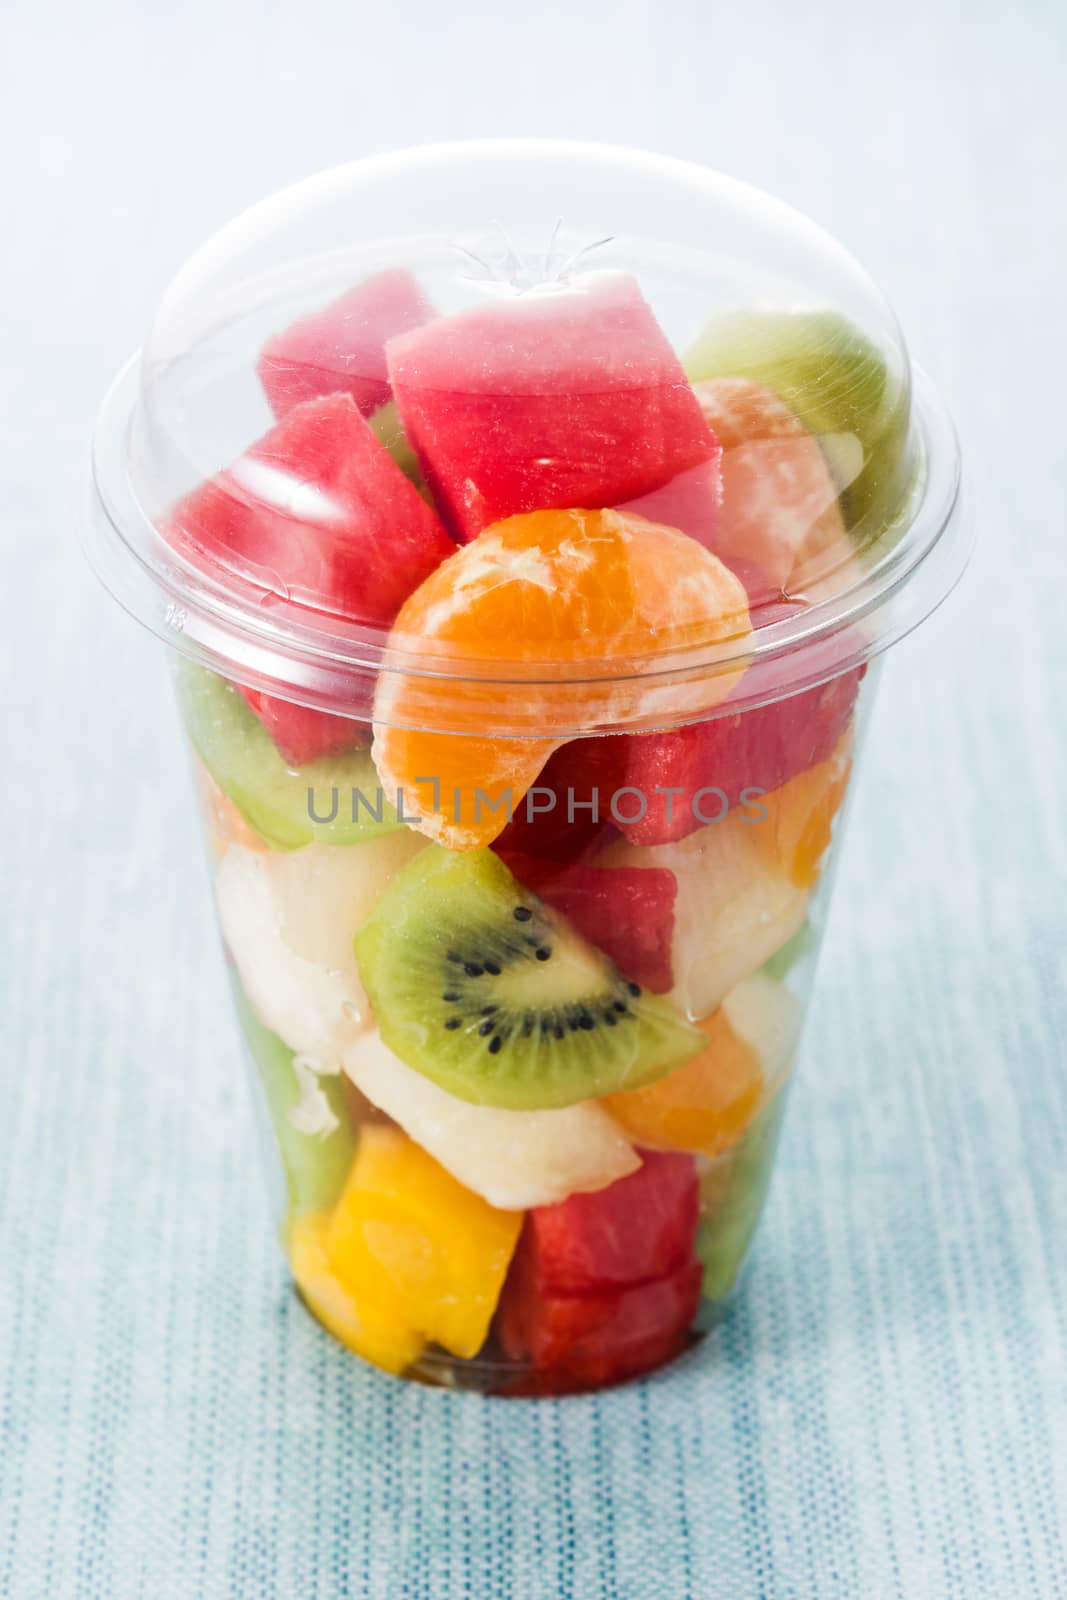 Fresh cut fruit in a plastic cup by chandlervid85